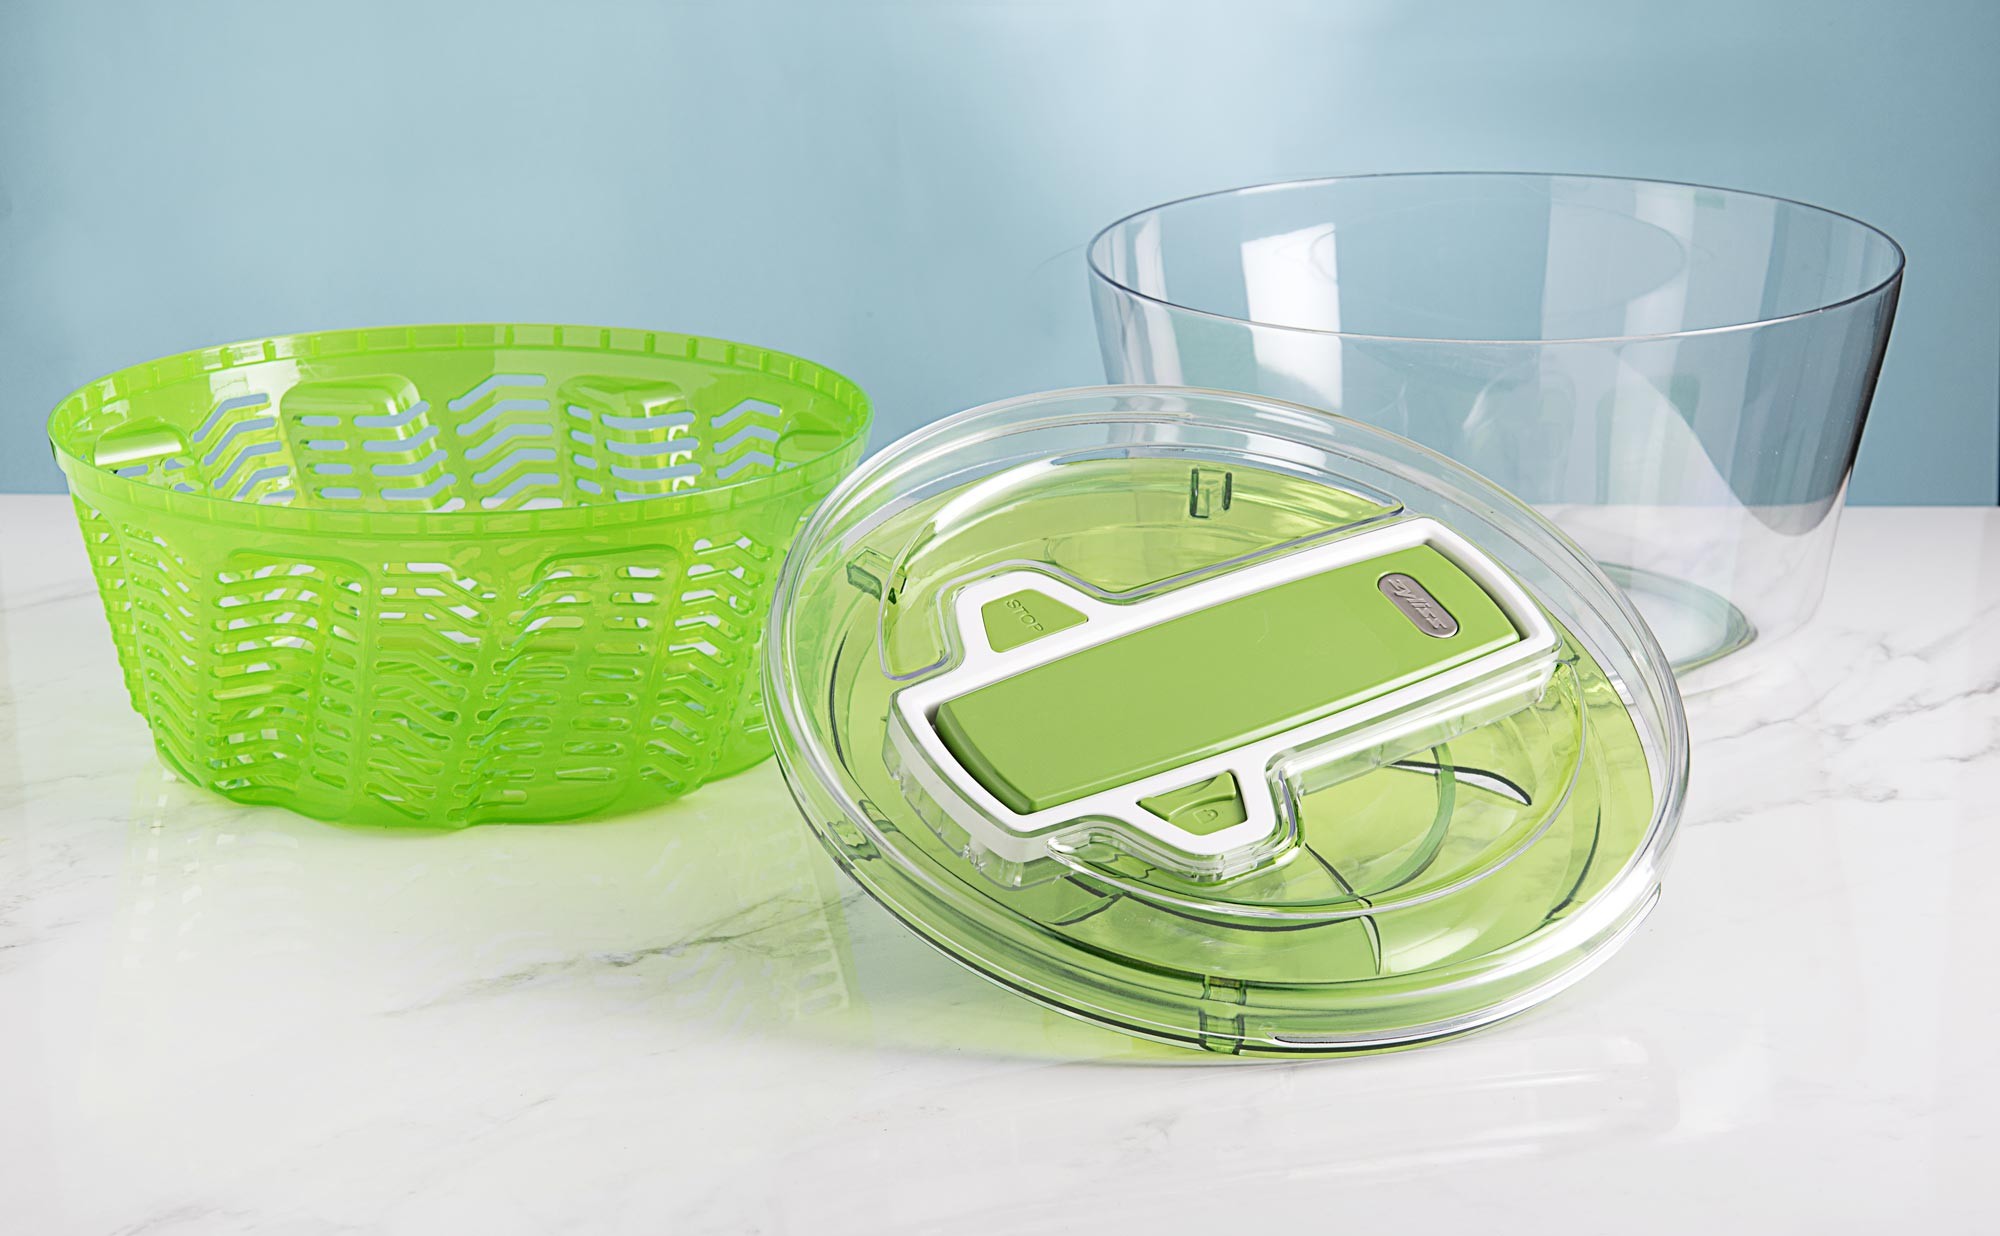 Zyliss Swift Dry Salad Spinner – The Gilded Carriage